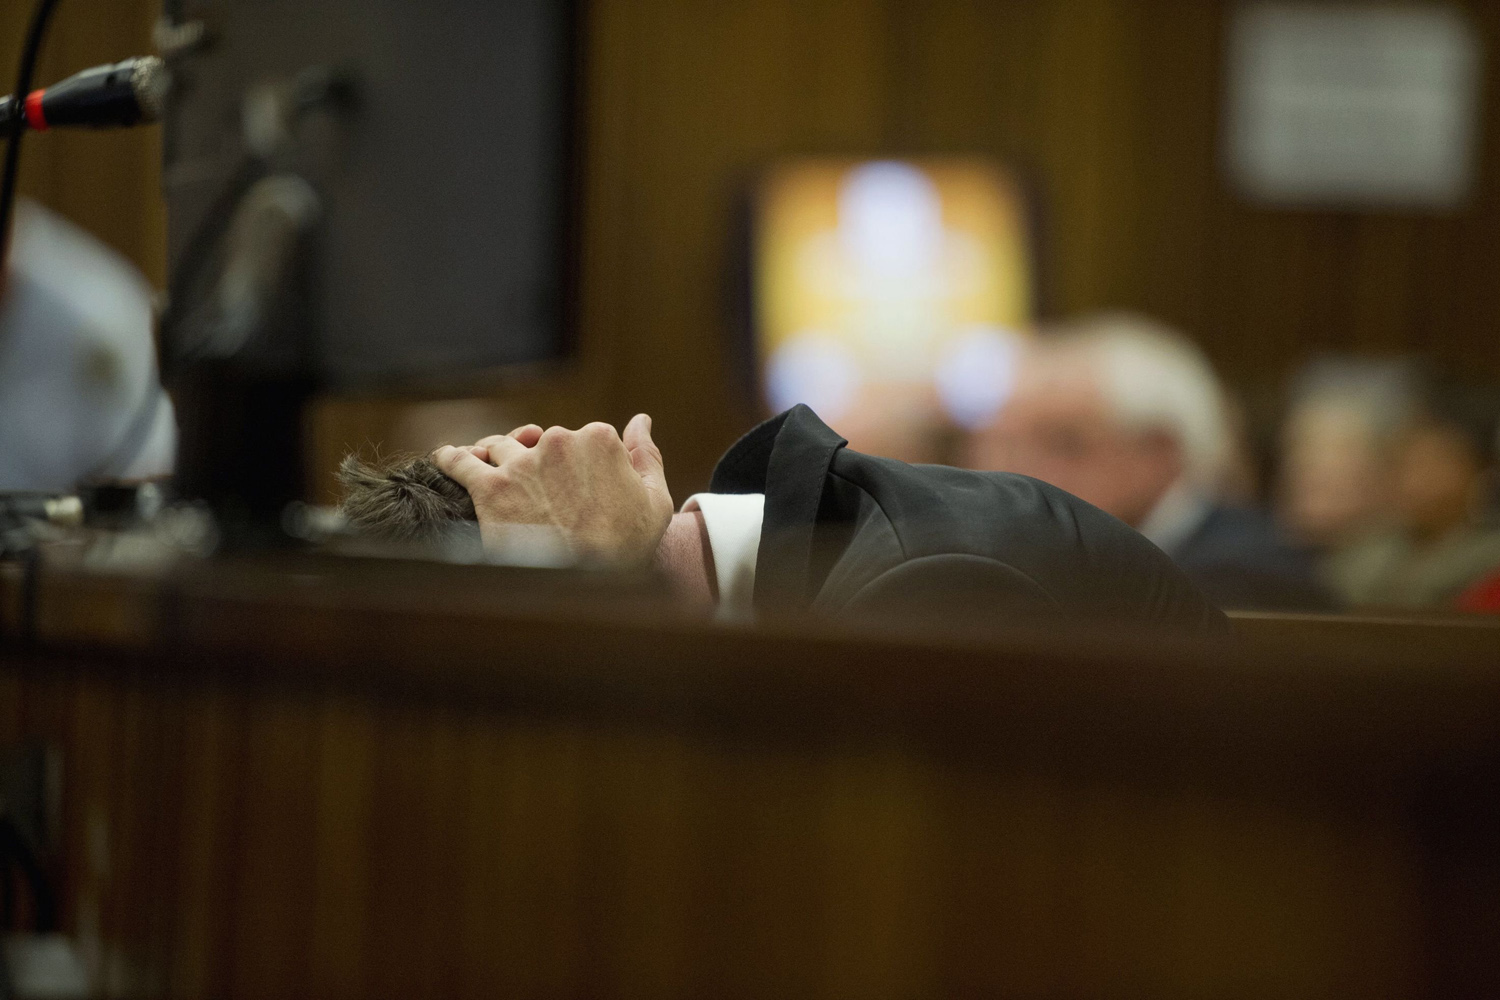 Pistorius reacts during his trial at the high court in Pretoria